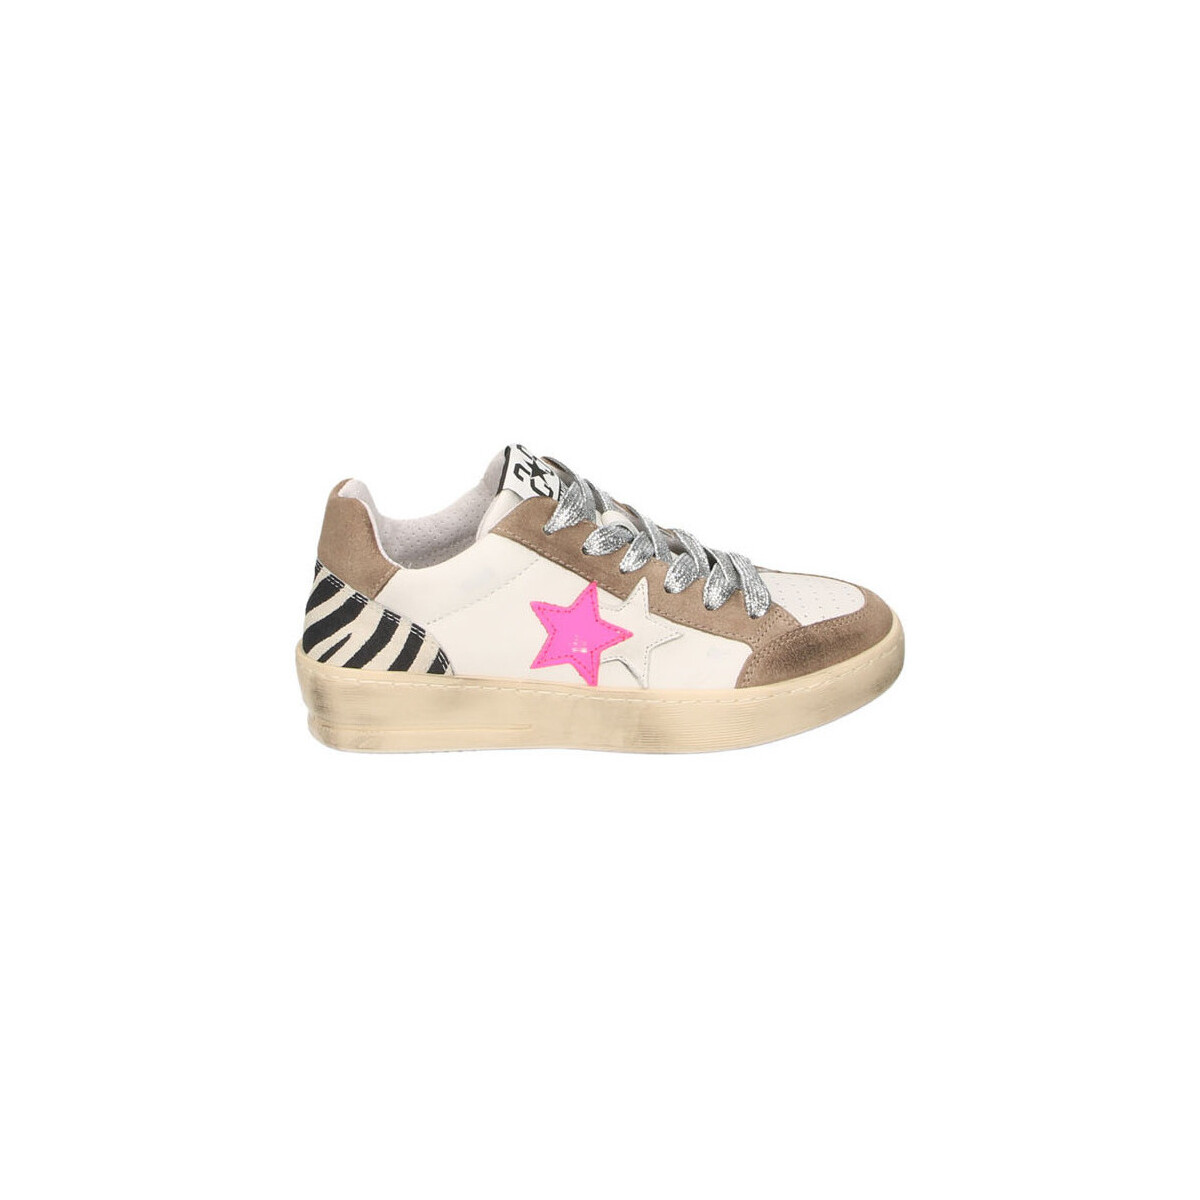 Scarpe Donna Sneakers Balada Sneakers New Star Pelle Bian - White Taupe Pink - 2sd4273-308 Multicolore